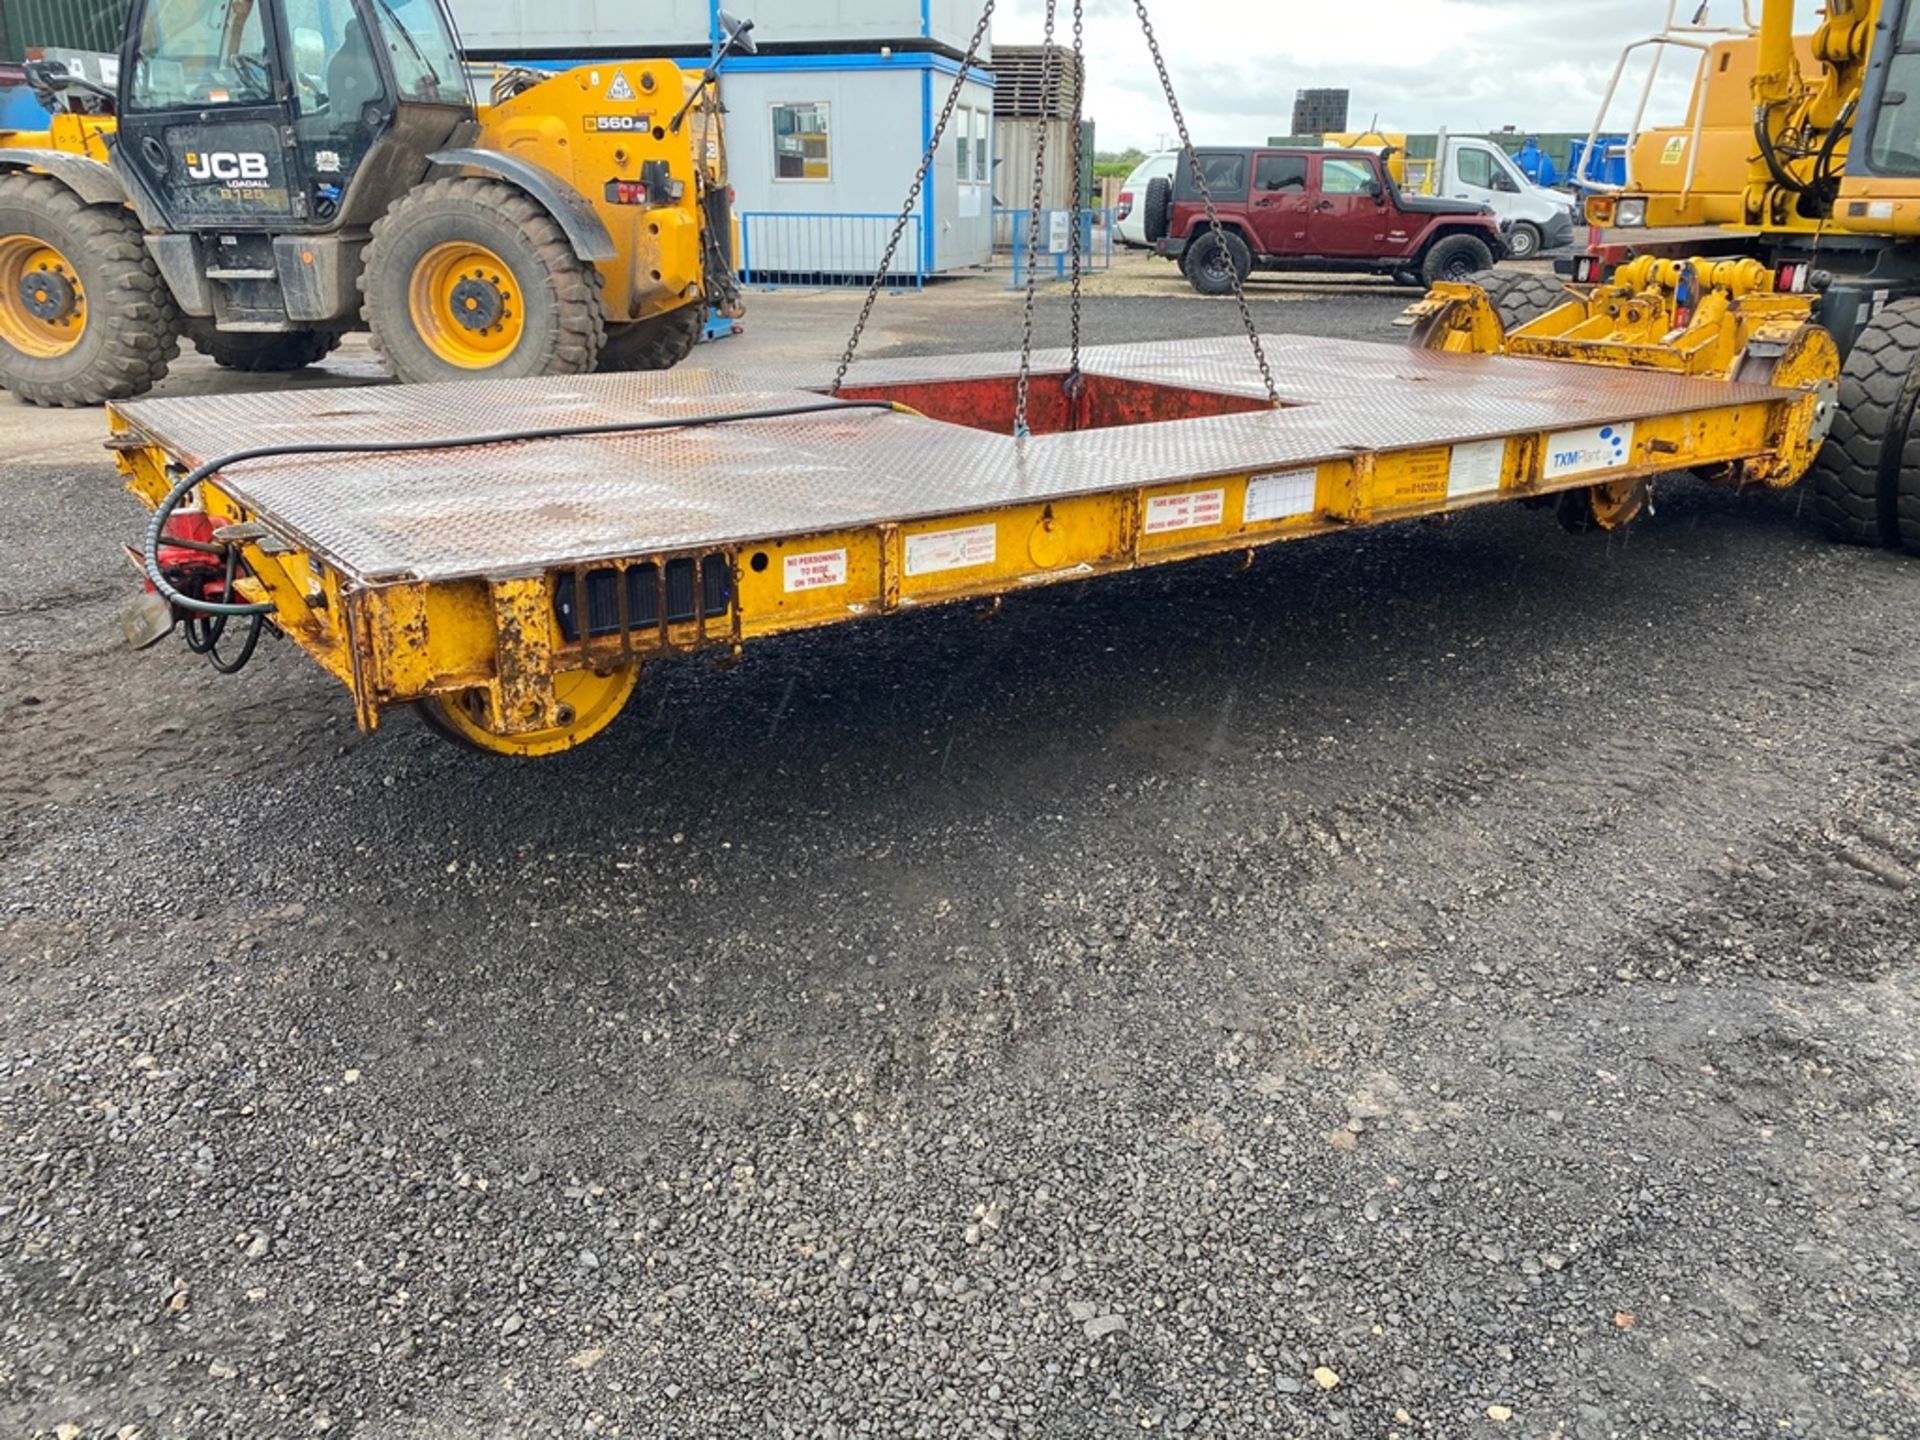 Rexquote T4 20T TWIN AXLE RAIL TRAILER, serial no. 101199-6, plant no. RT193, approx. 5m x 2.5m x - Image 2 of 11